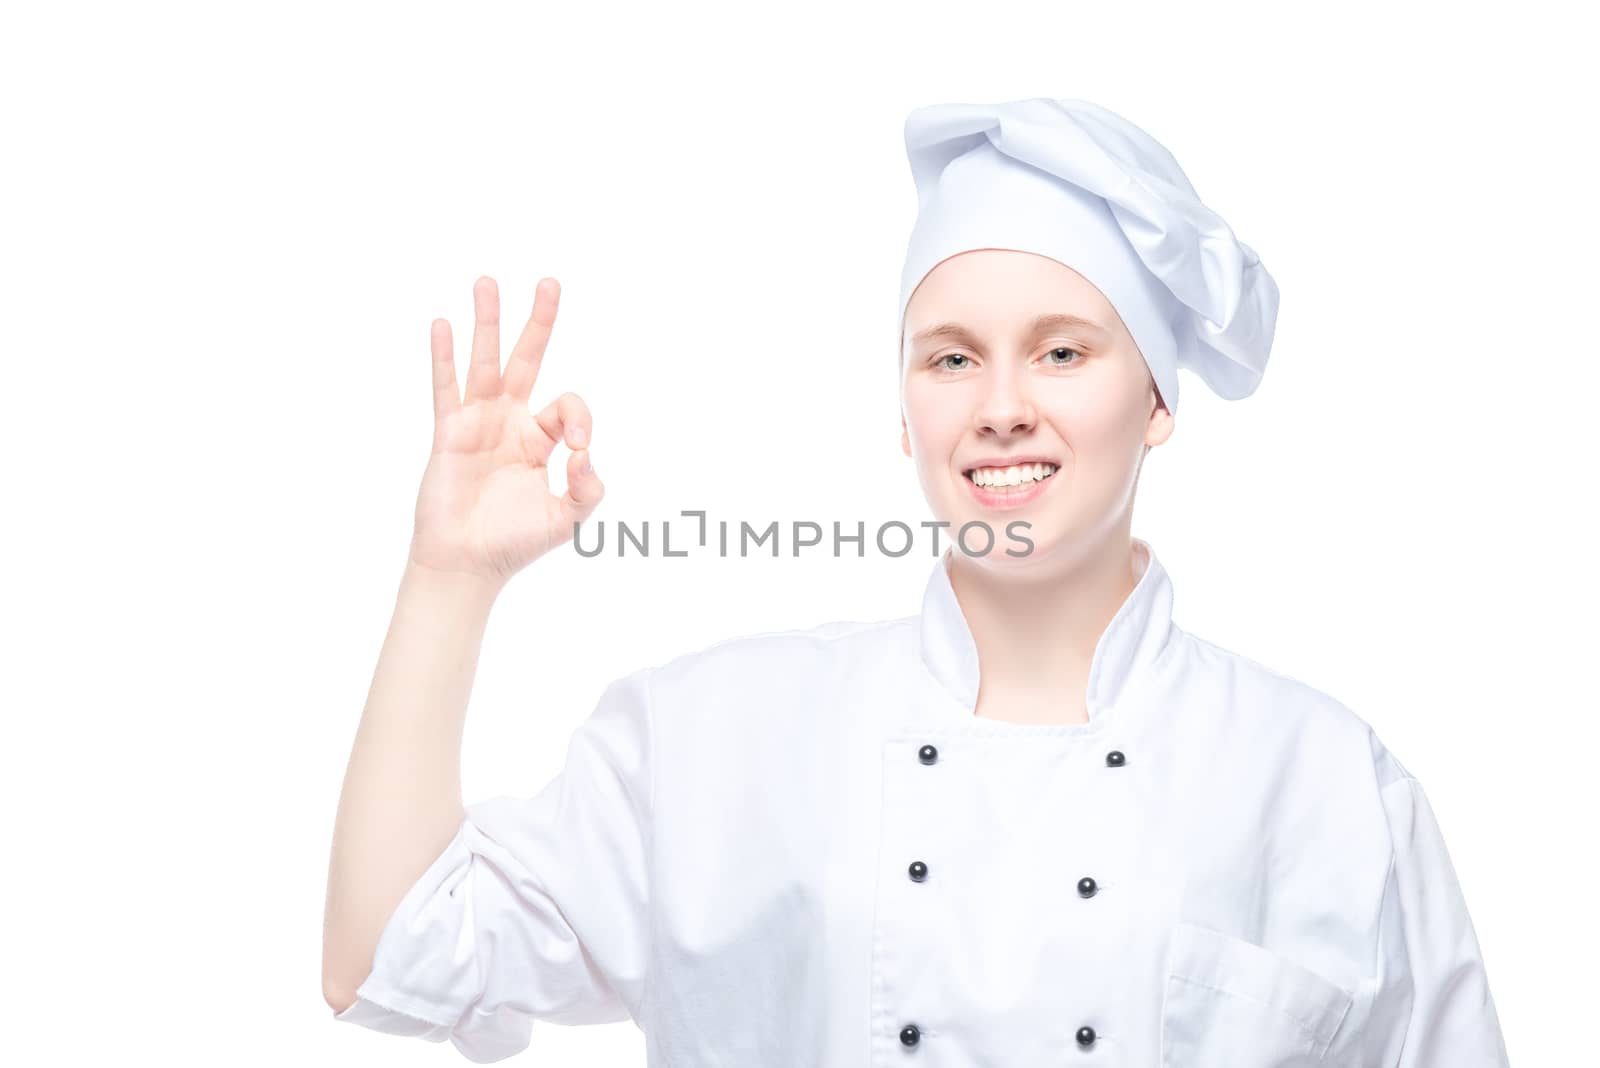 chef gesticulating on white background, all ok gesture in isolation